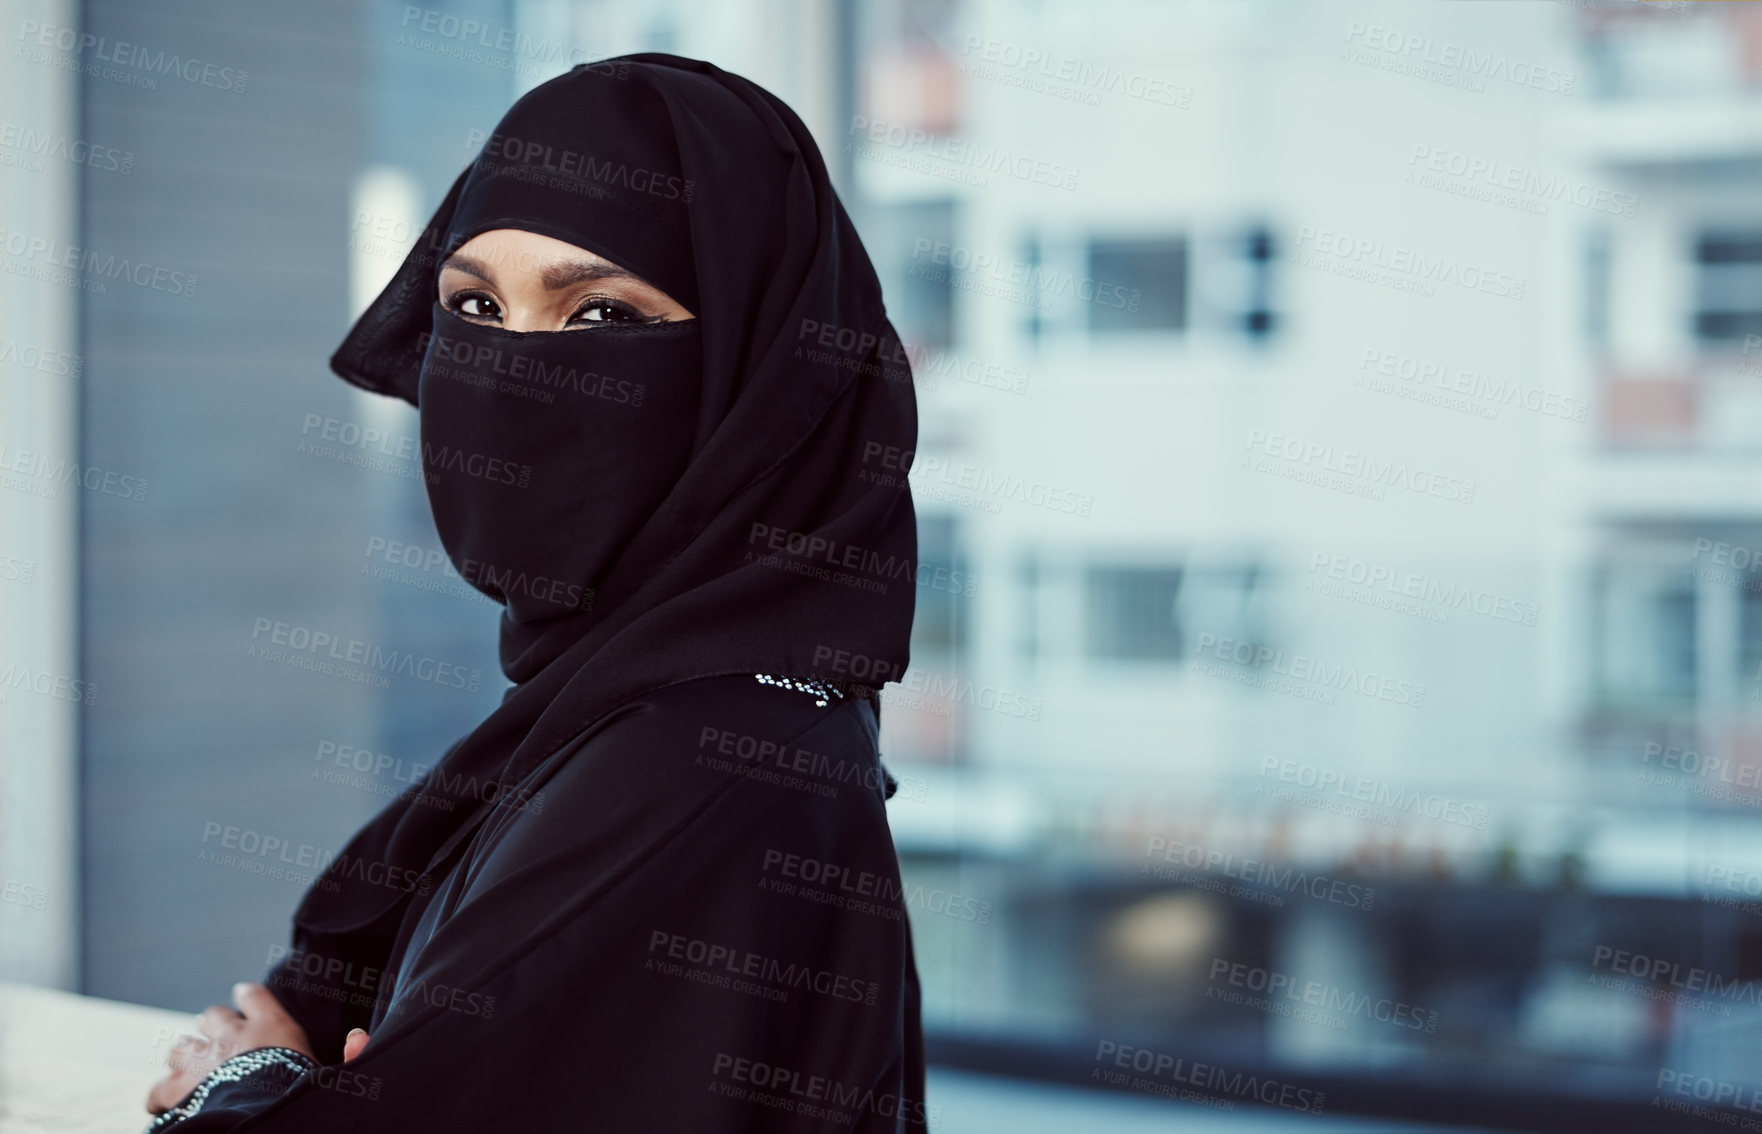 Buy stock photo Cropped portrait of an arabic businesswoman in a burka standing in her office